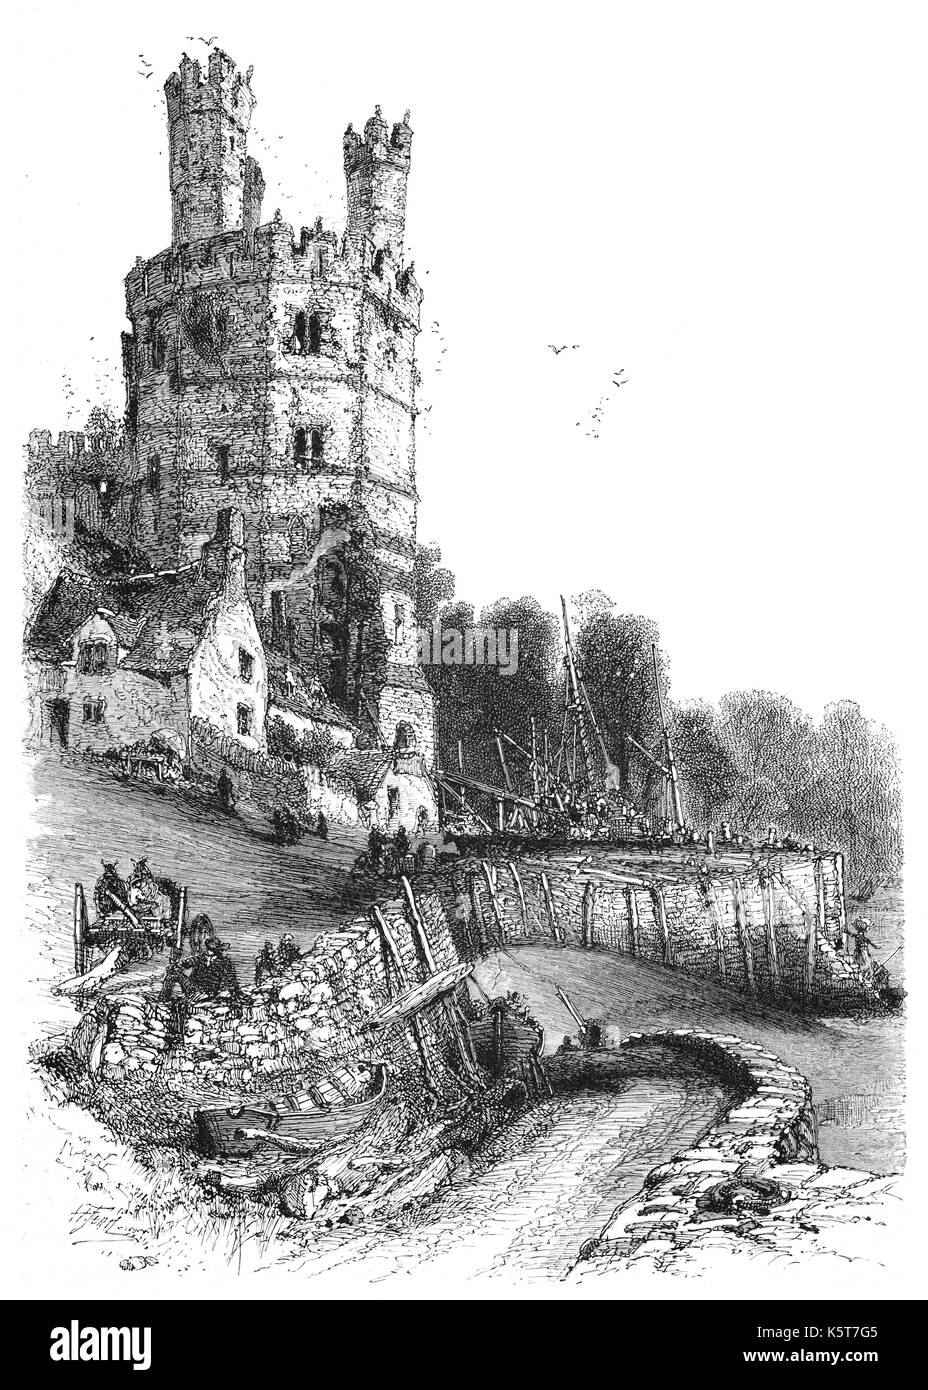 1870: A small harbour below the Eagle Tower at the western corner of medieval Caernarfon Castle, aka, Carnarvon Castle. The tower has three turrets which were once surmounted by statues of eagles and contained grand lodgings. The castle was built by King Edward I of England in 1283. Caernarfon, Gwynedd, North Wales. Stock Photo